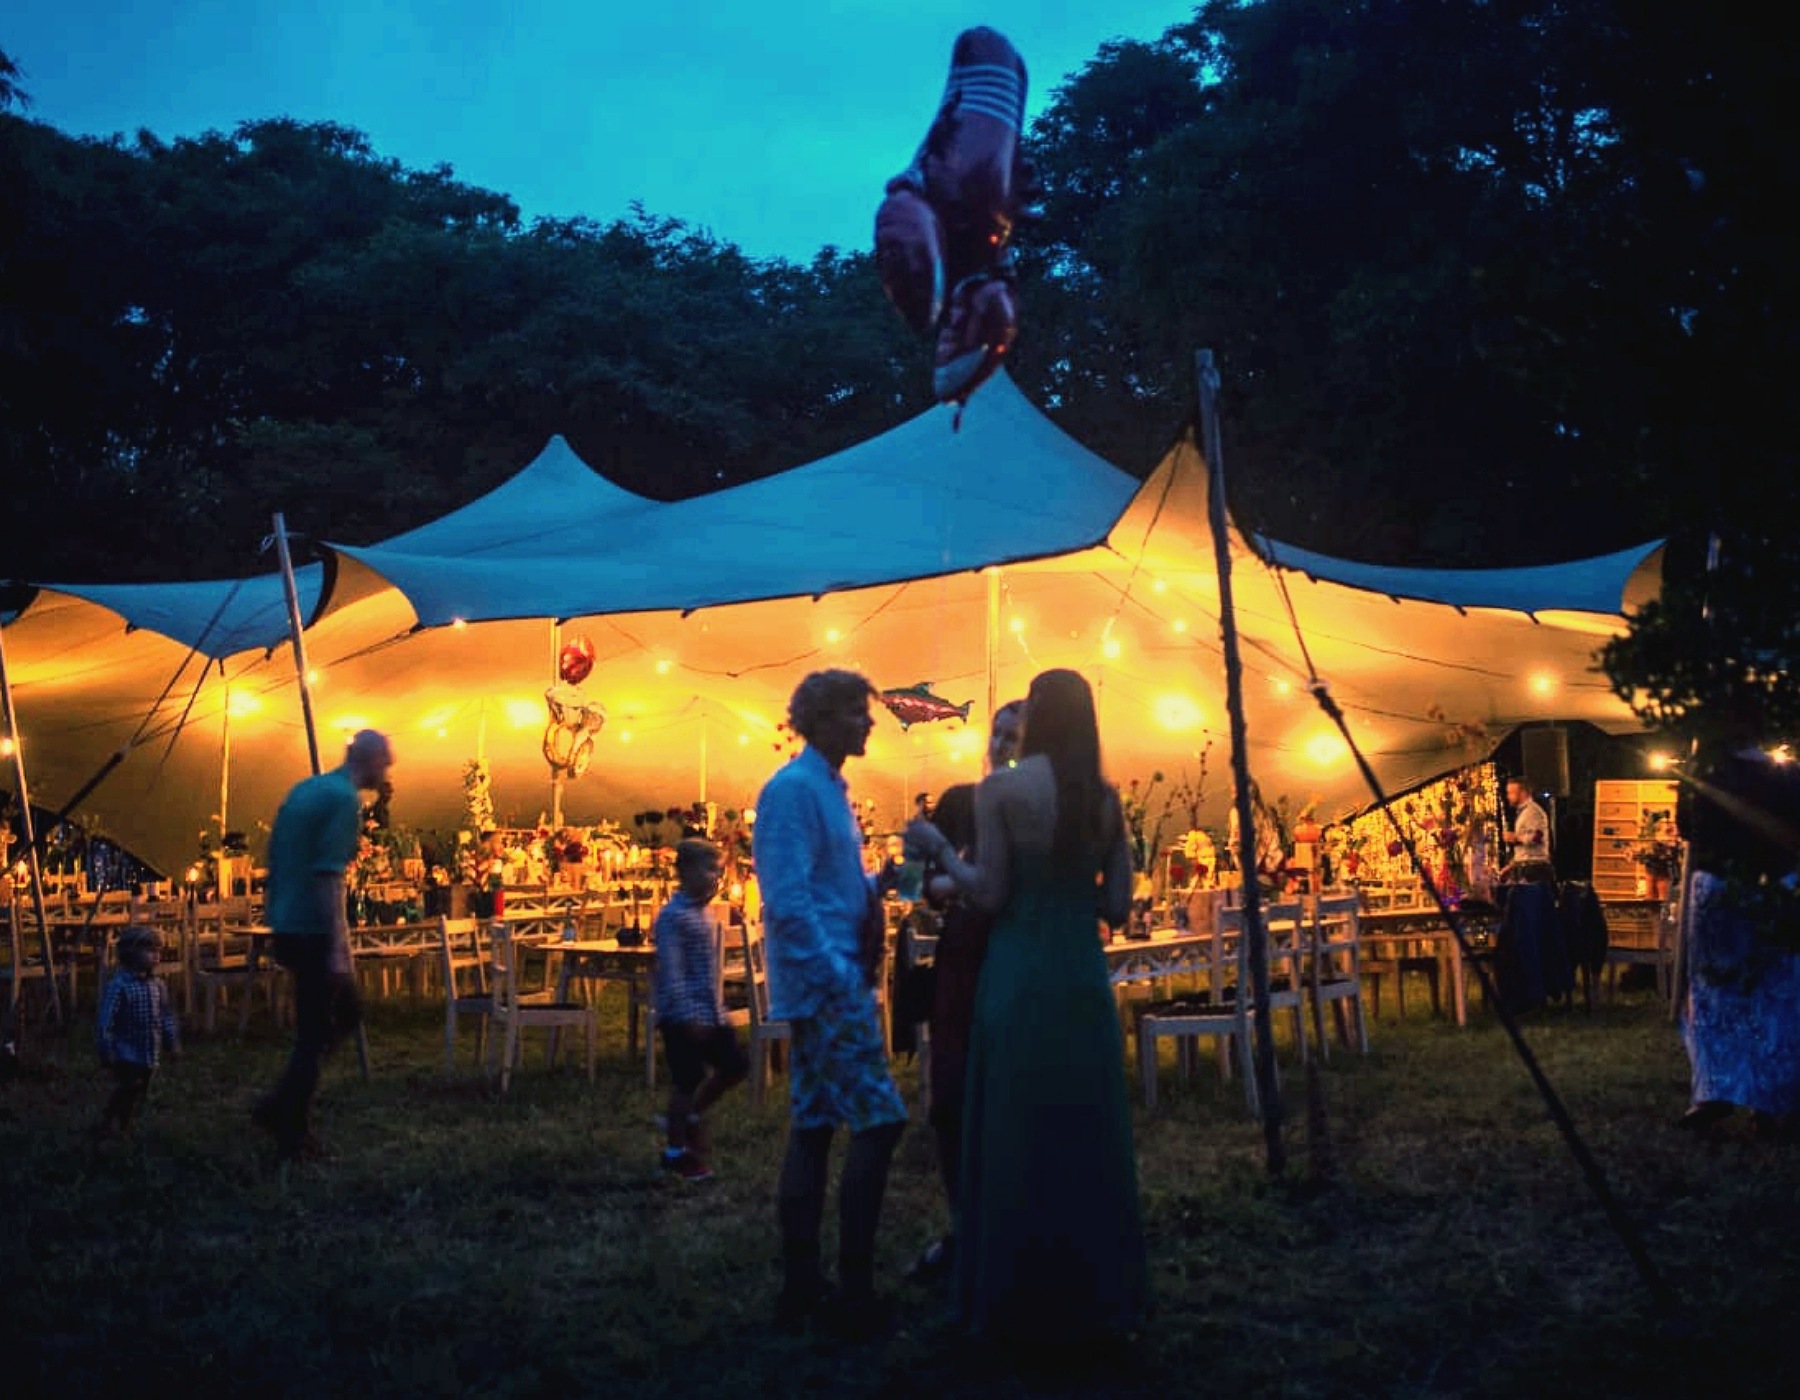 Outdoor Wedding In A Stretch Tent With Lights And Tables And Chairs.